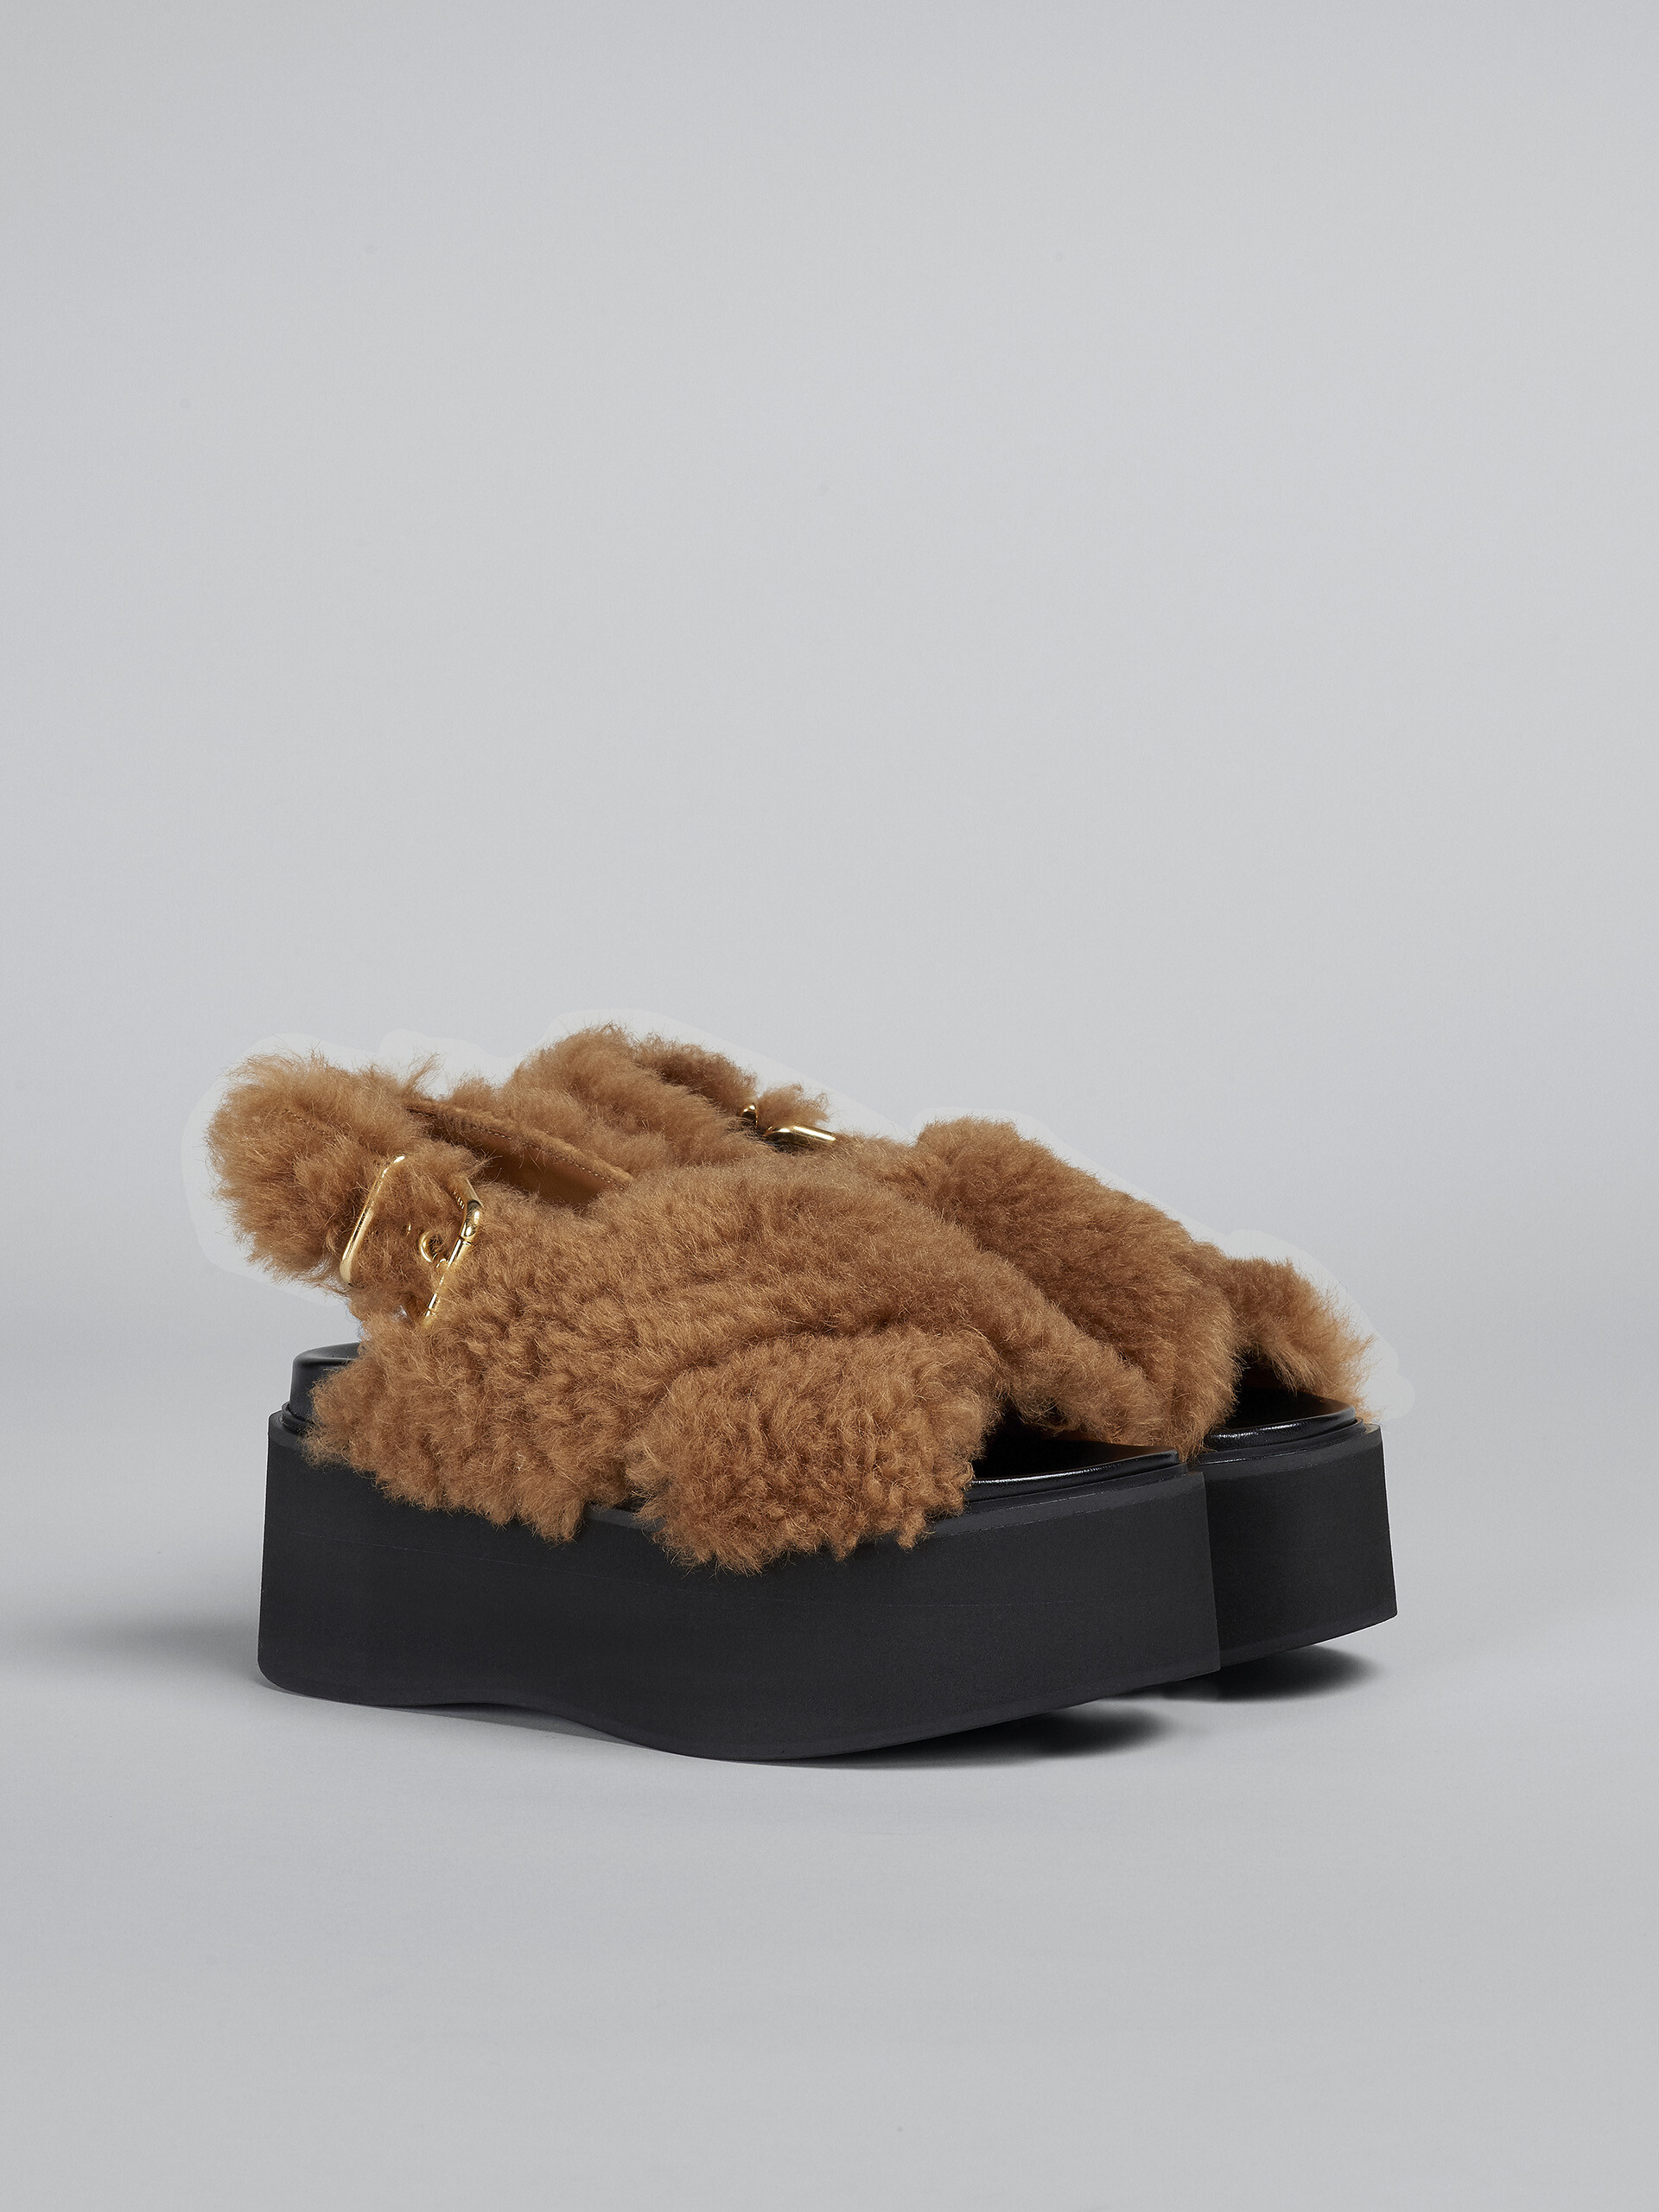 Shearling wedge - Sandals - Image 2